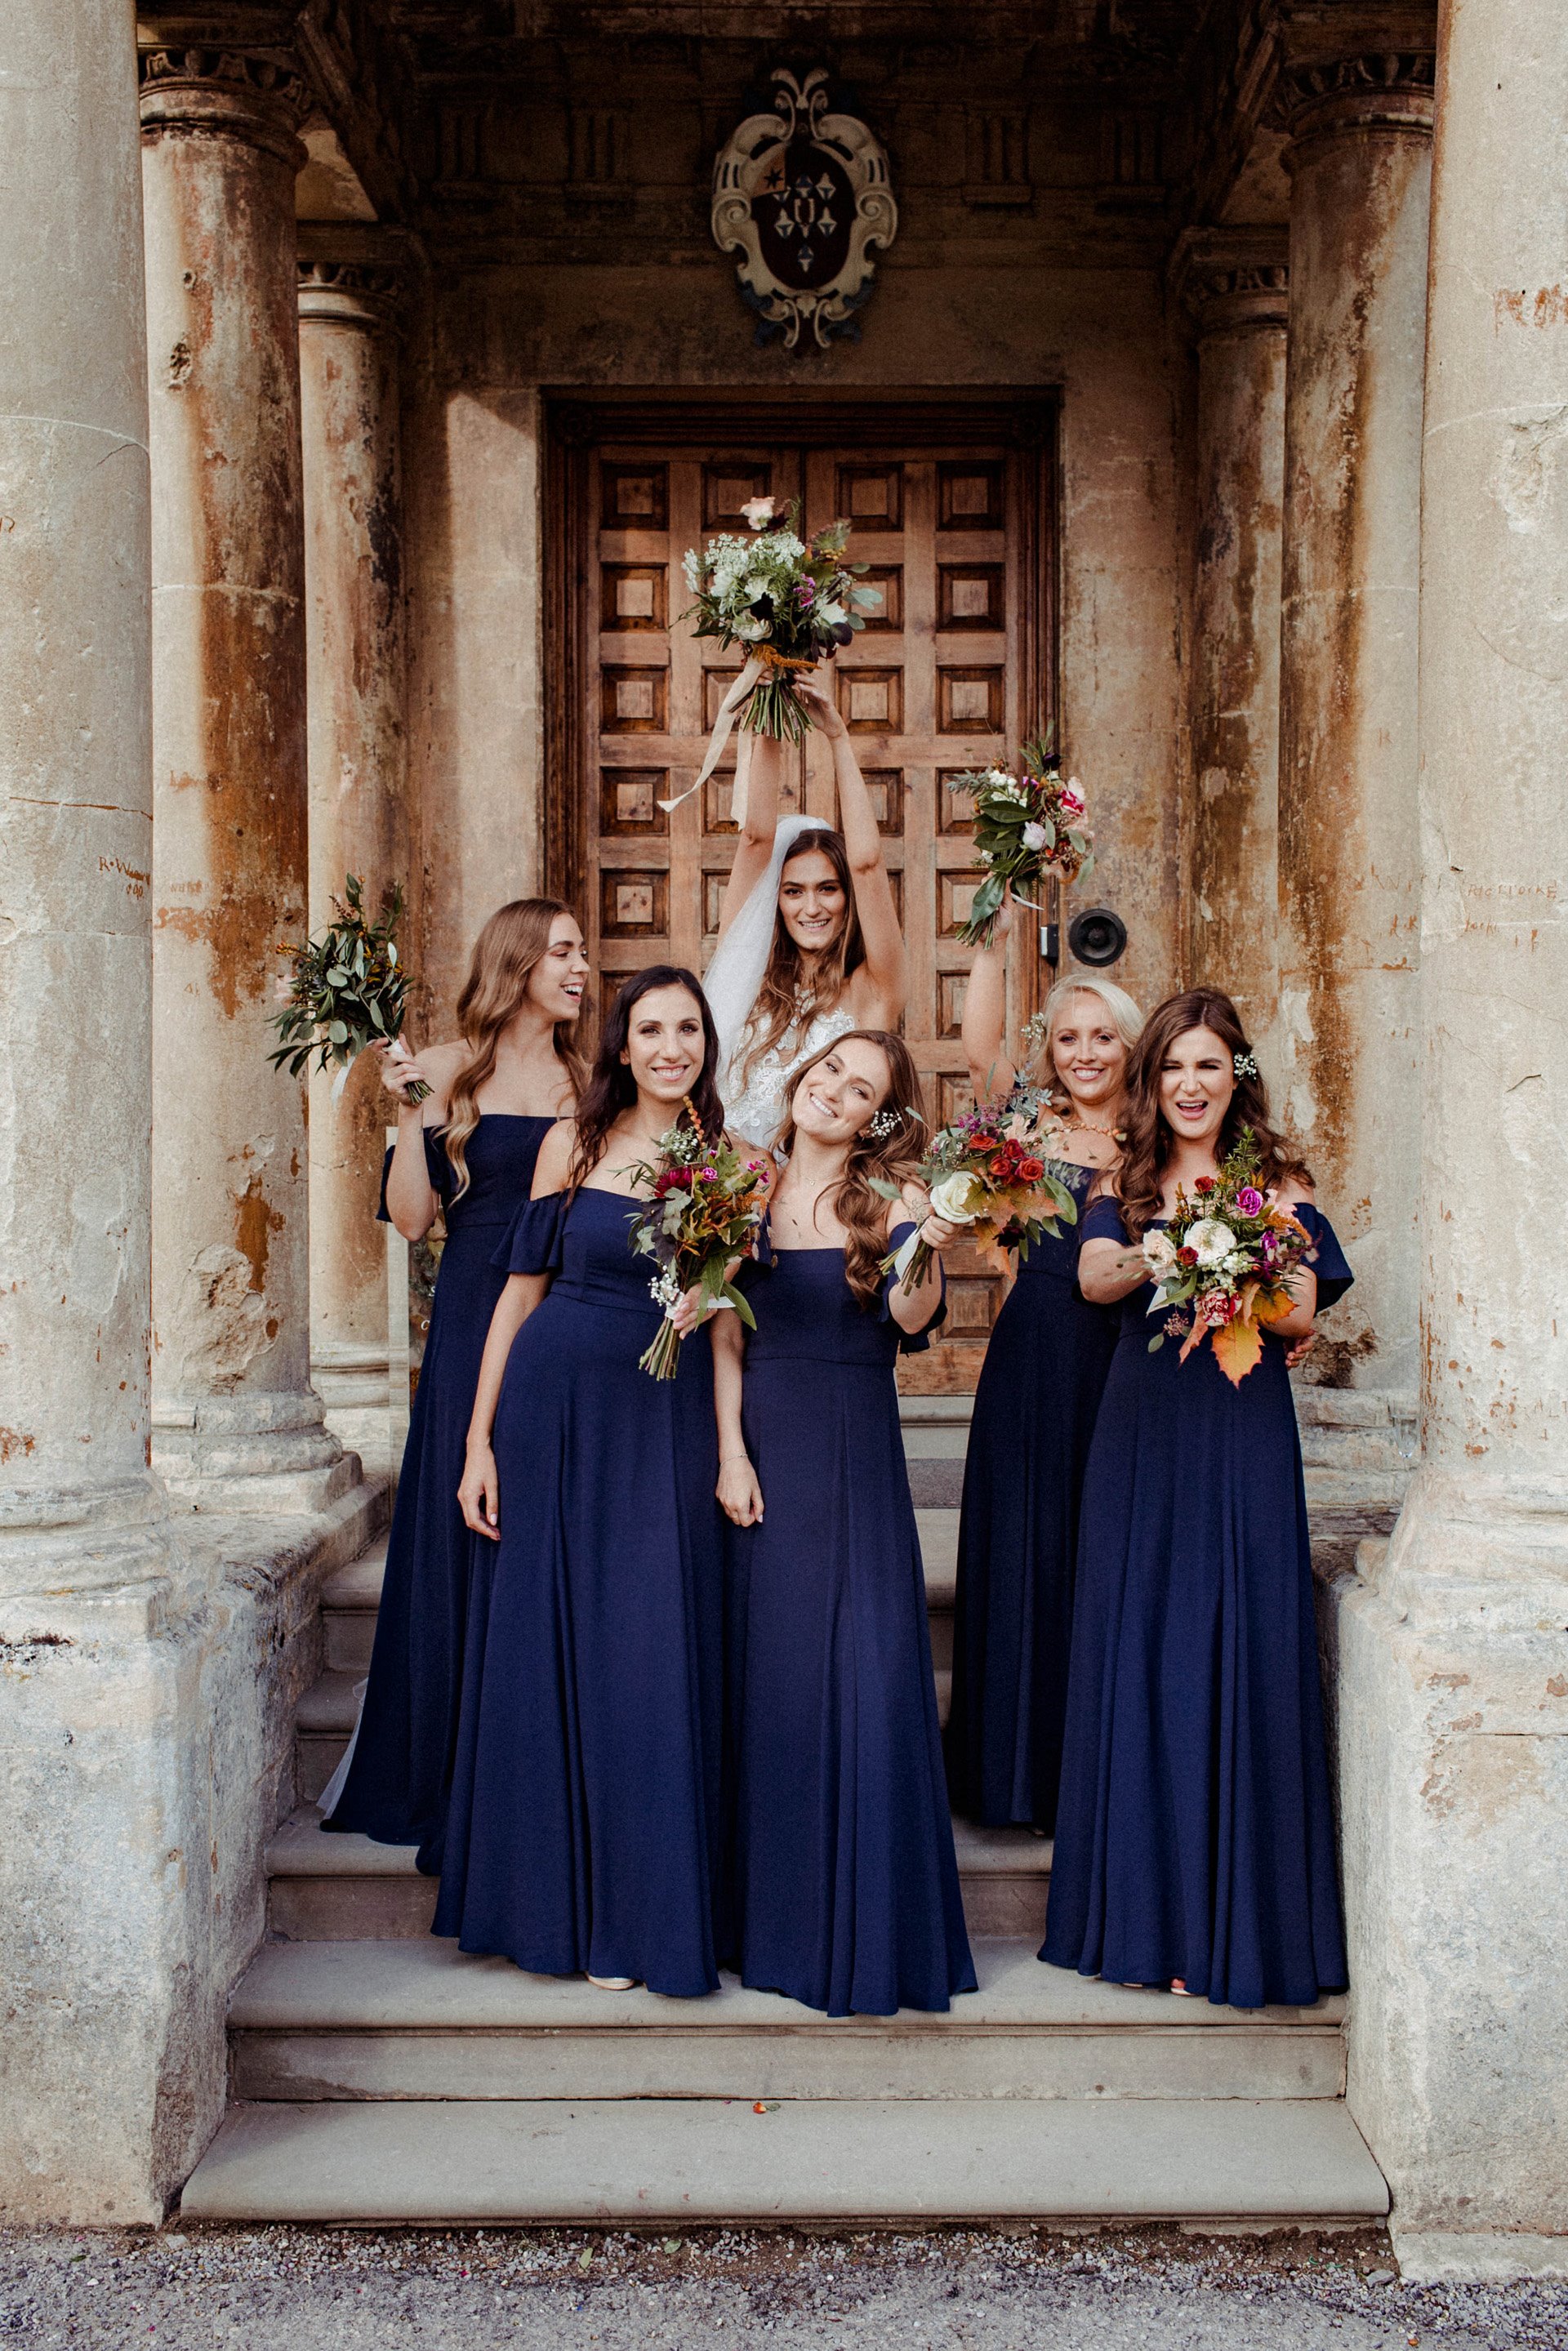 Bridal party on steps of mansion house wedding venue holding autumnal bouquets